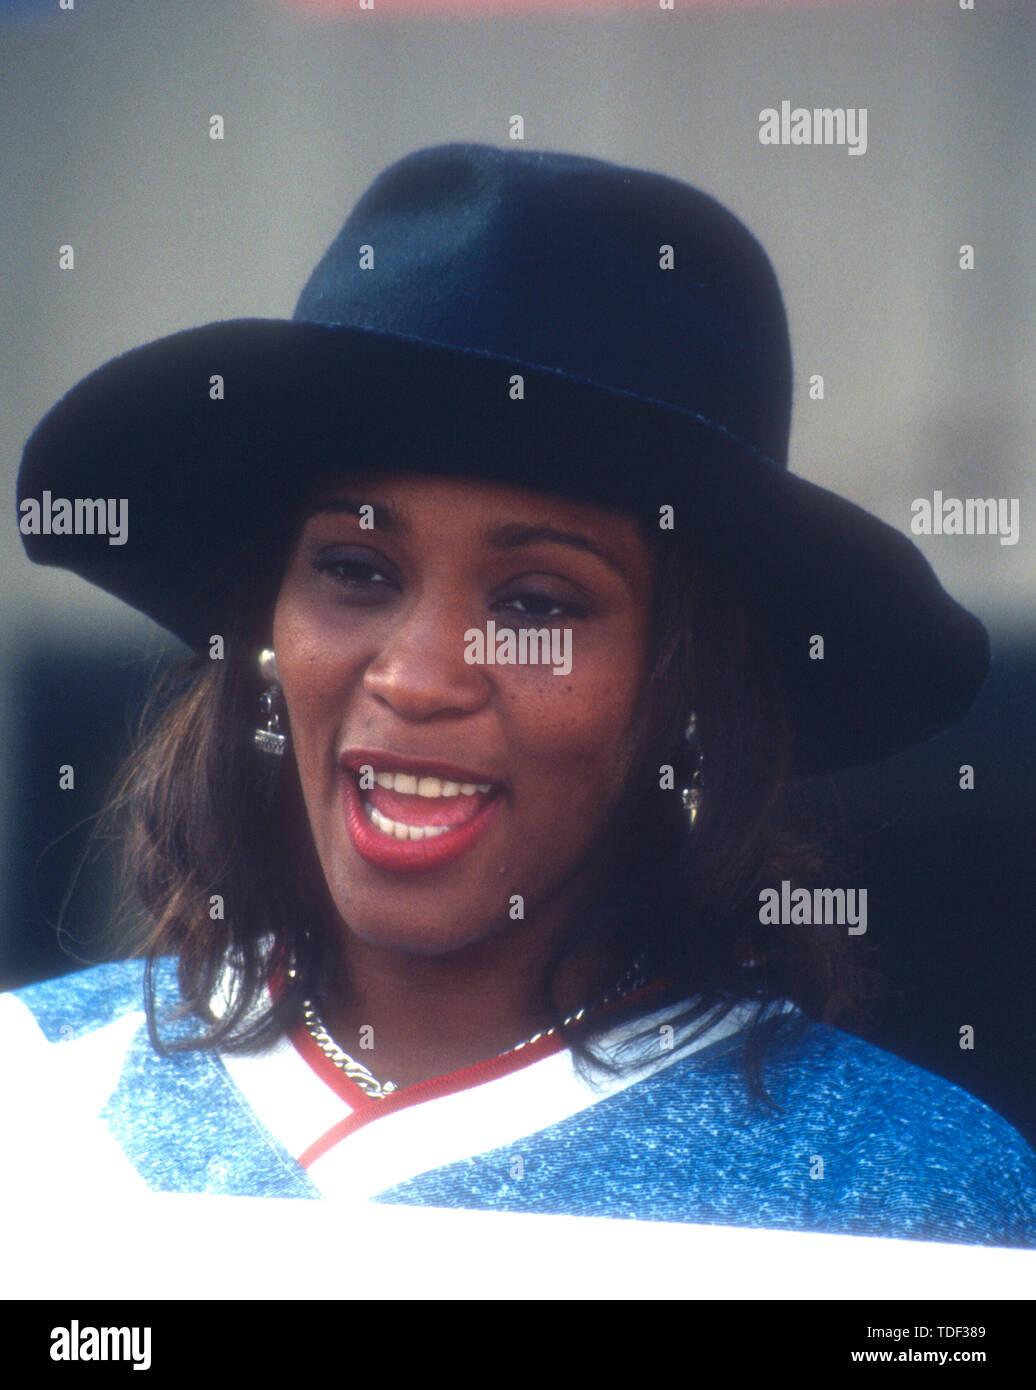 Pasadena, California, USA 15th July 1994 Singer Whitney Houston attends Pre-Game World Cup Ceremony Event on July 15, 1994 at the Rose Bowl in Pasadena, California, USA. Photo by Barry King/Alamy Stock Photo Stock Photo